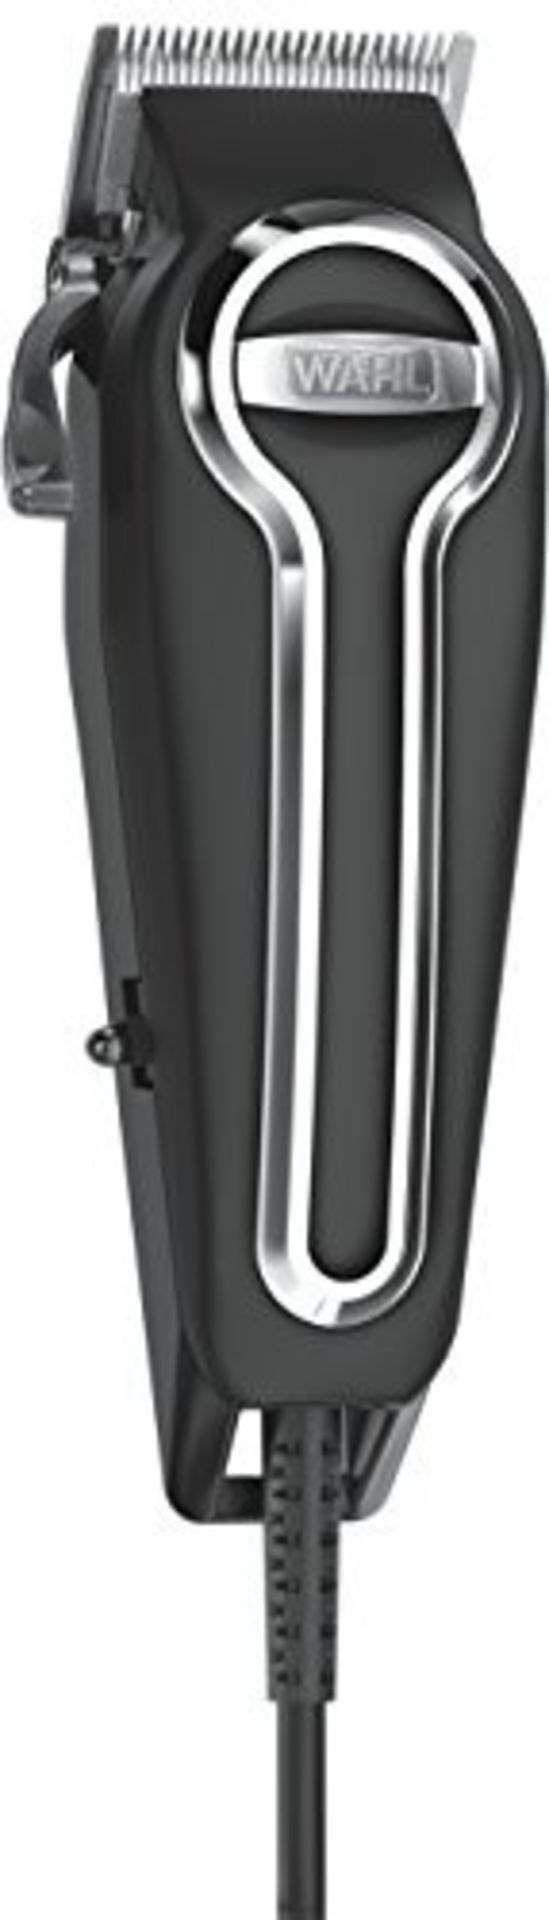 RRP £54.00 Wahl Hair Clippers for Men with Precision Self-Sharpening Blades, Elite Pro Head Shave